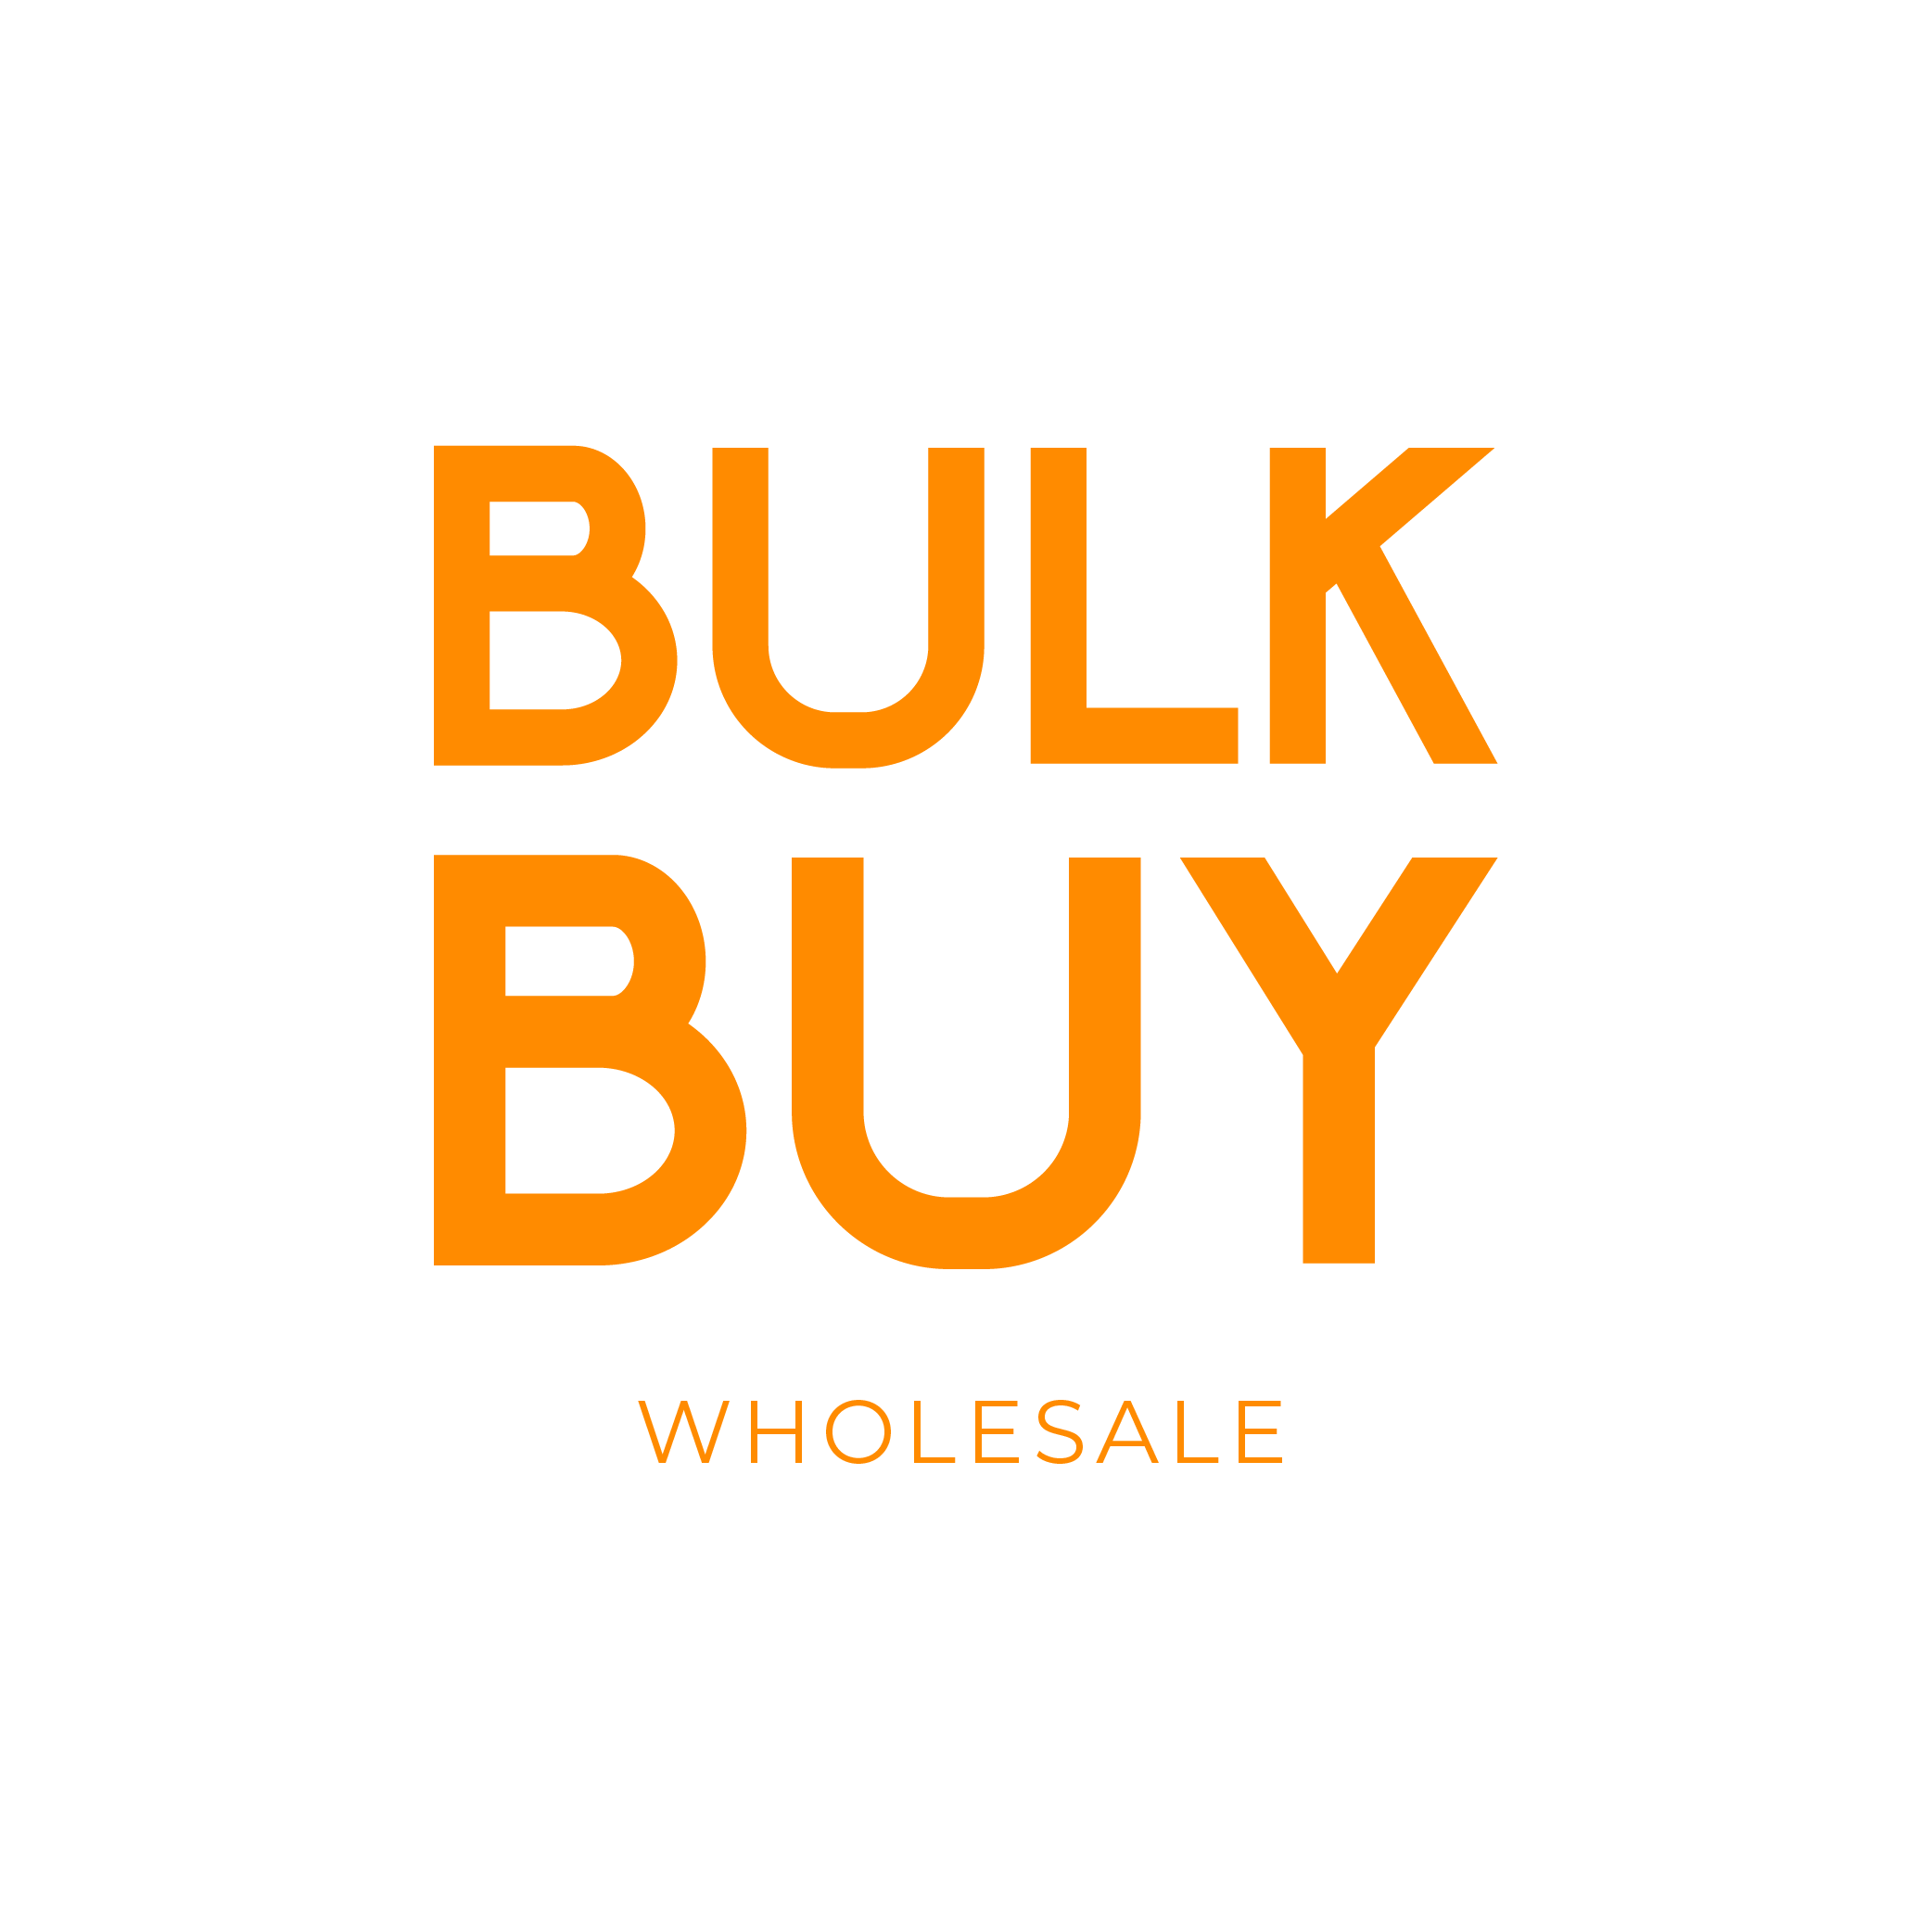 Logo of Bulk Buy Wholesale Cash And Carry Wholesalers In Sutton Coldfield, West Midlands